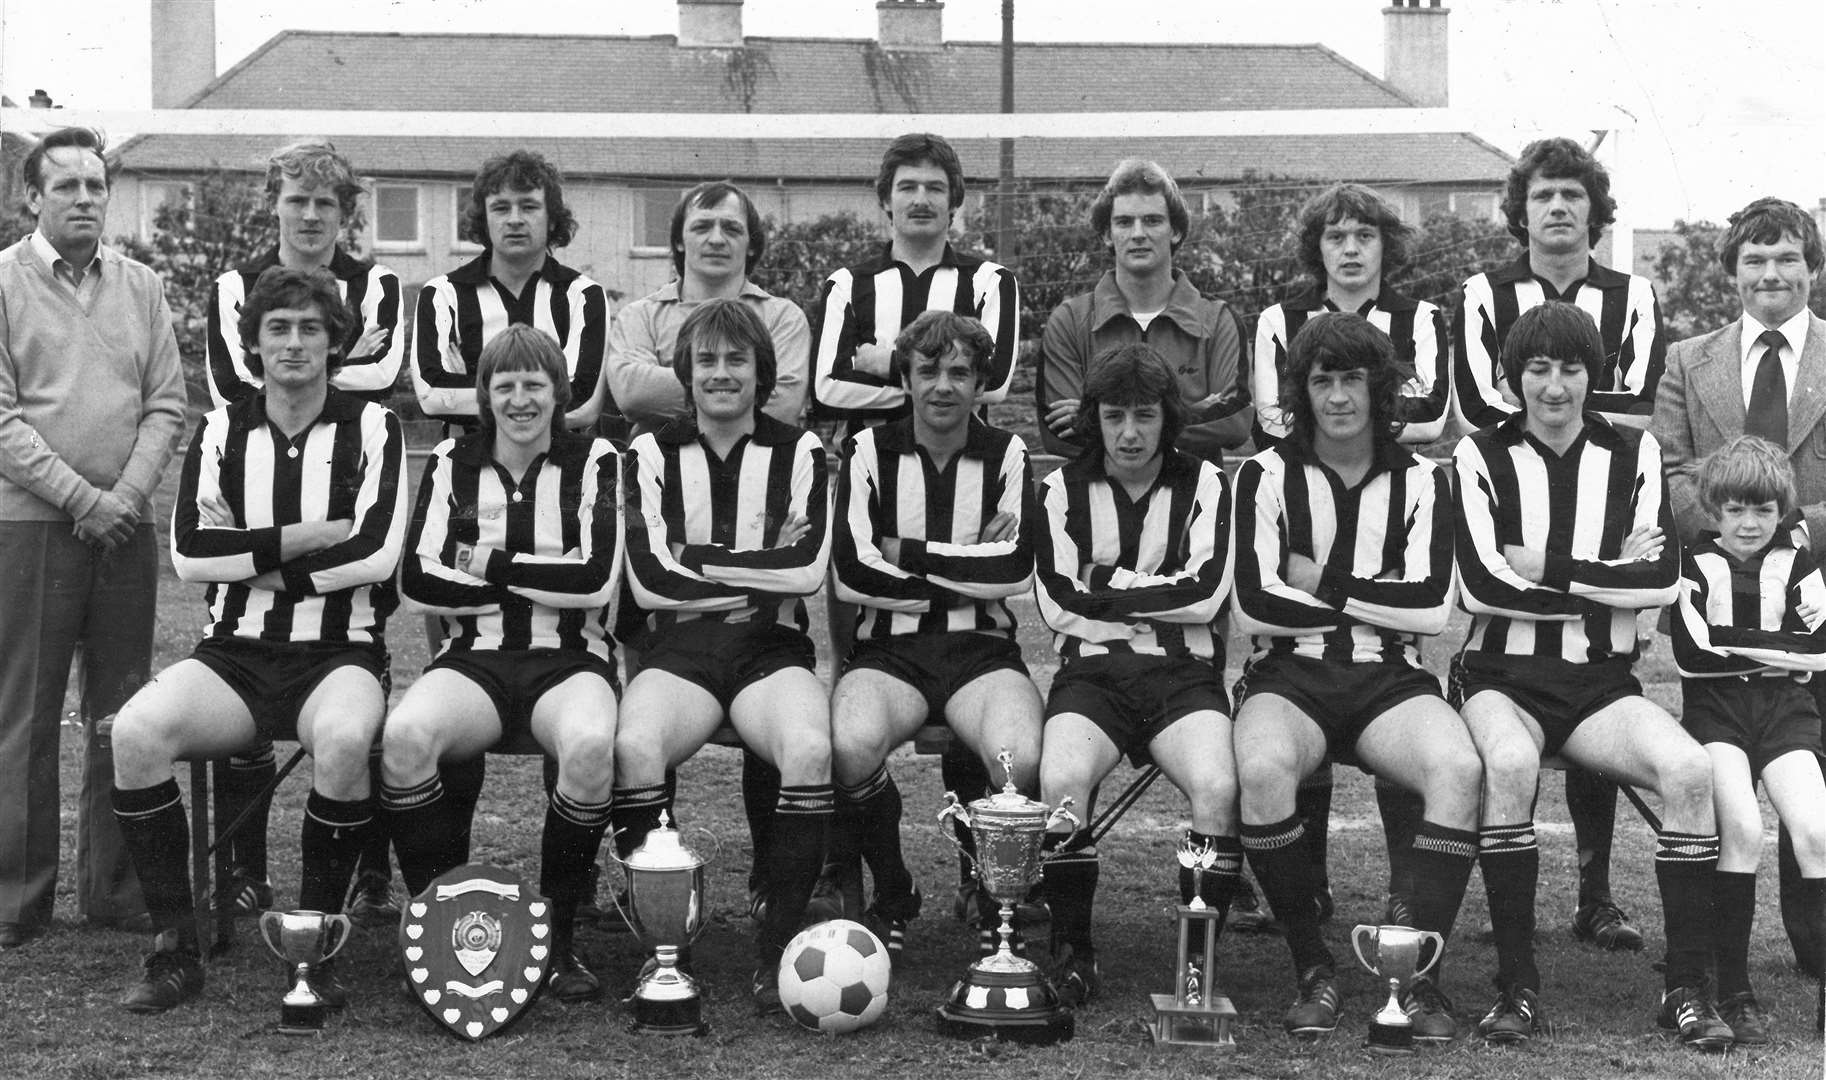 Wick Academy in the late 1970s with Pat Miller as goalkeeper. Back row (from left): J MacDonald, D Rosie, G Topping, P Miller, D McAdie, A Bremner, R Sutherland, P George, C Harper. Front: D Eyers, E Larnach, D Lyall, W Wydmuch, I Munro, G Maxwell, J Harrold, S Harper.